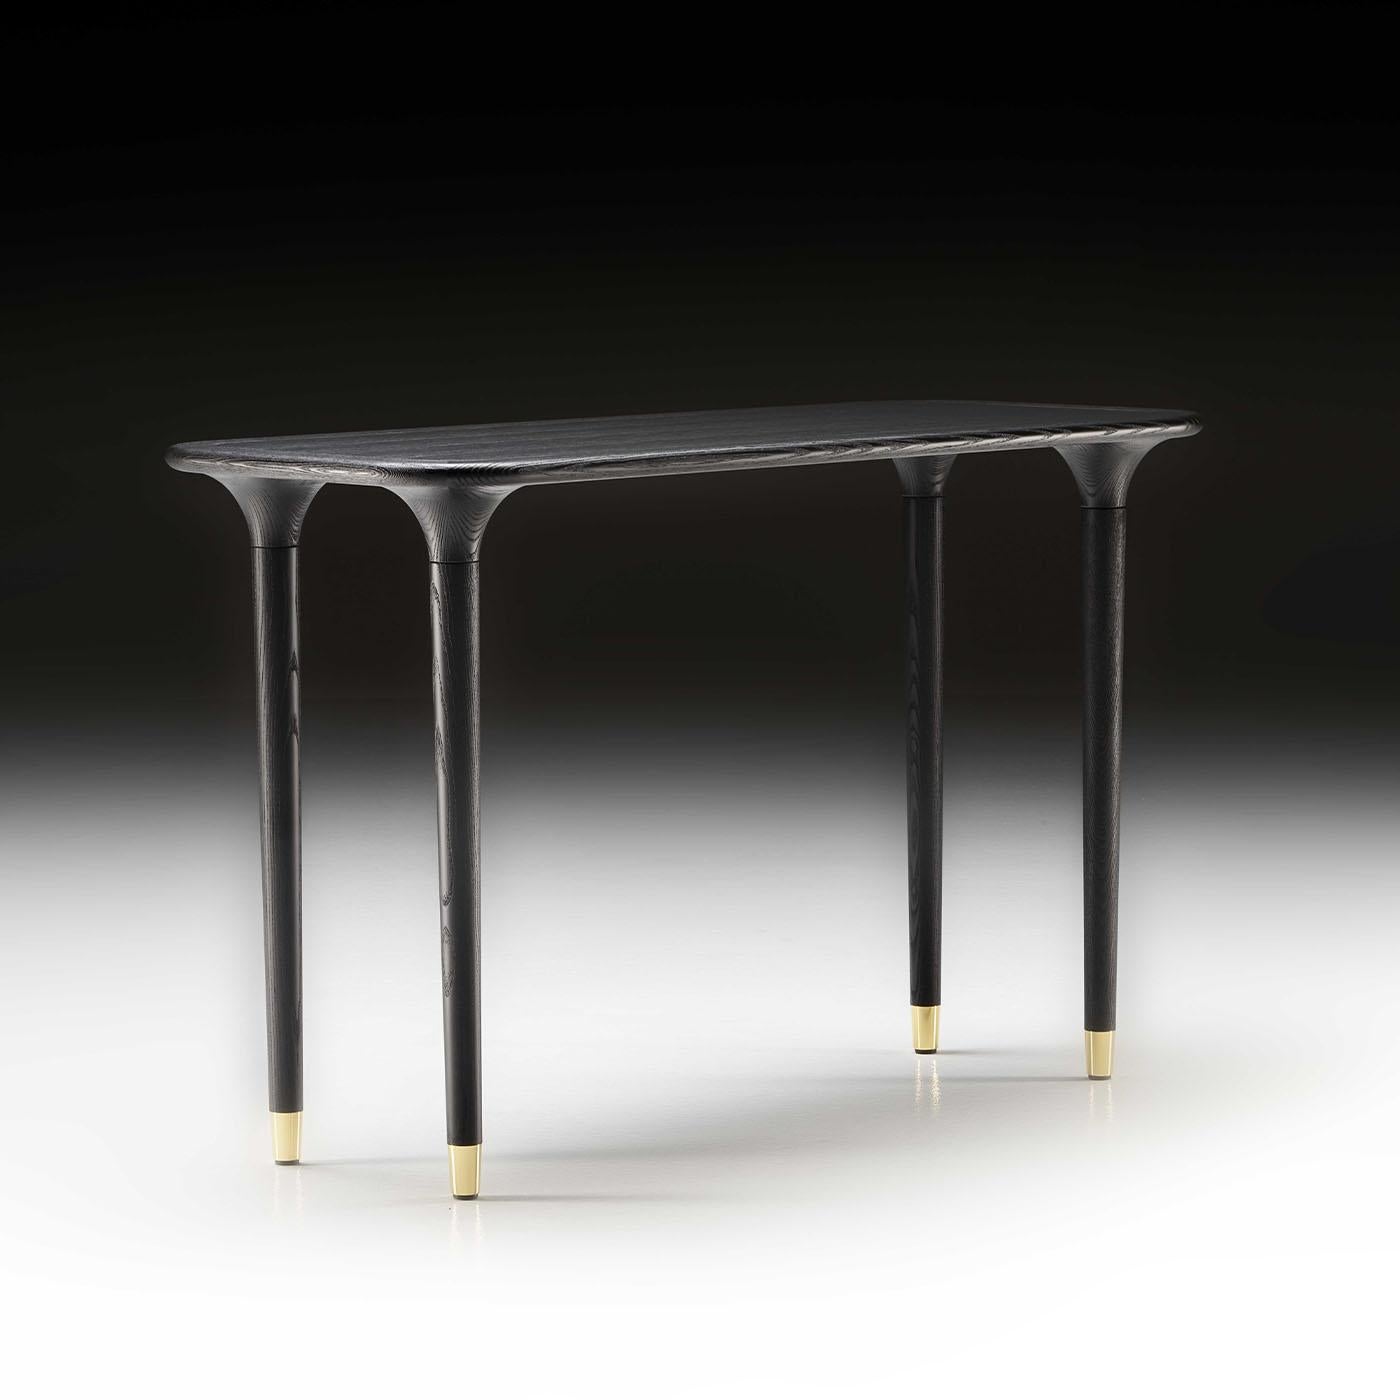 Thoughtfully balanced proportions combined to smooth curves define the elegant look of this console in solid mocha-stained ash. Illuminated by the presence of galvanized golden tips, the tapered legs meet the top by following a progressively flaring